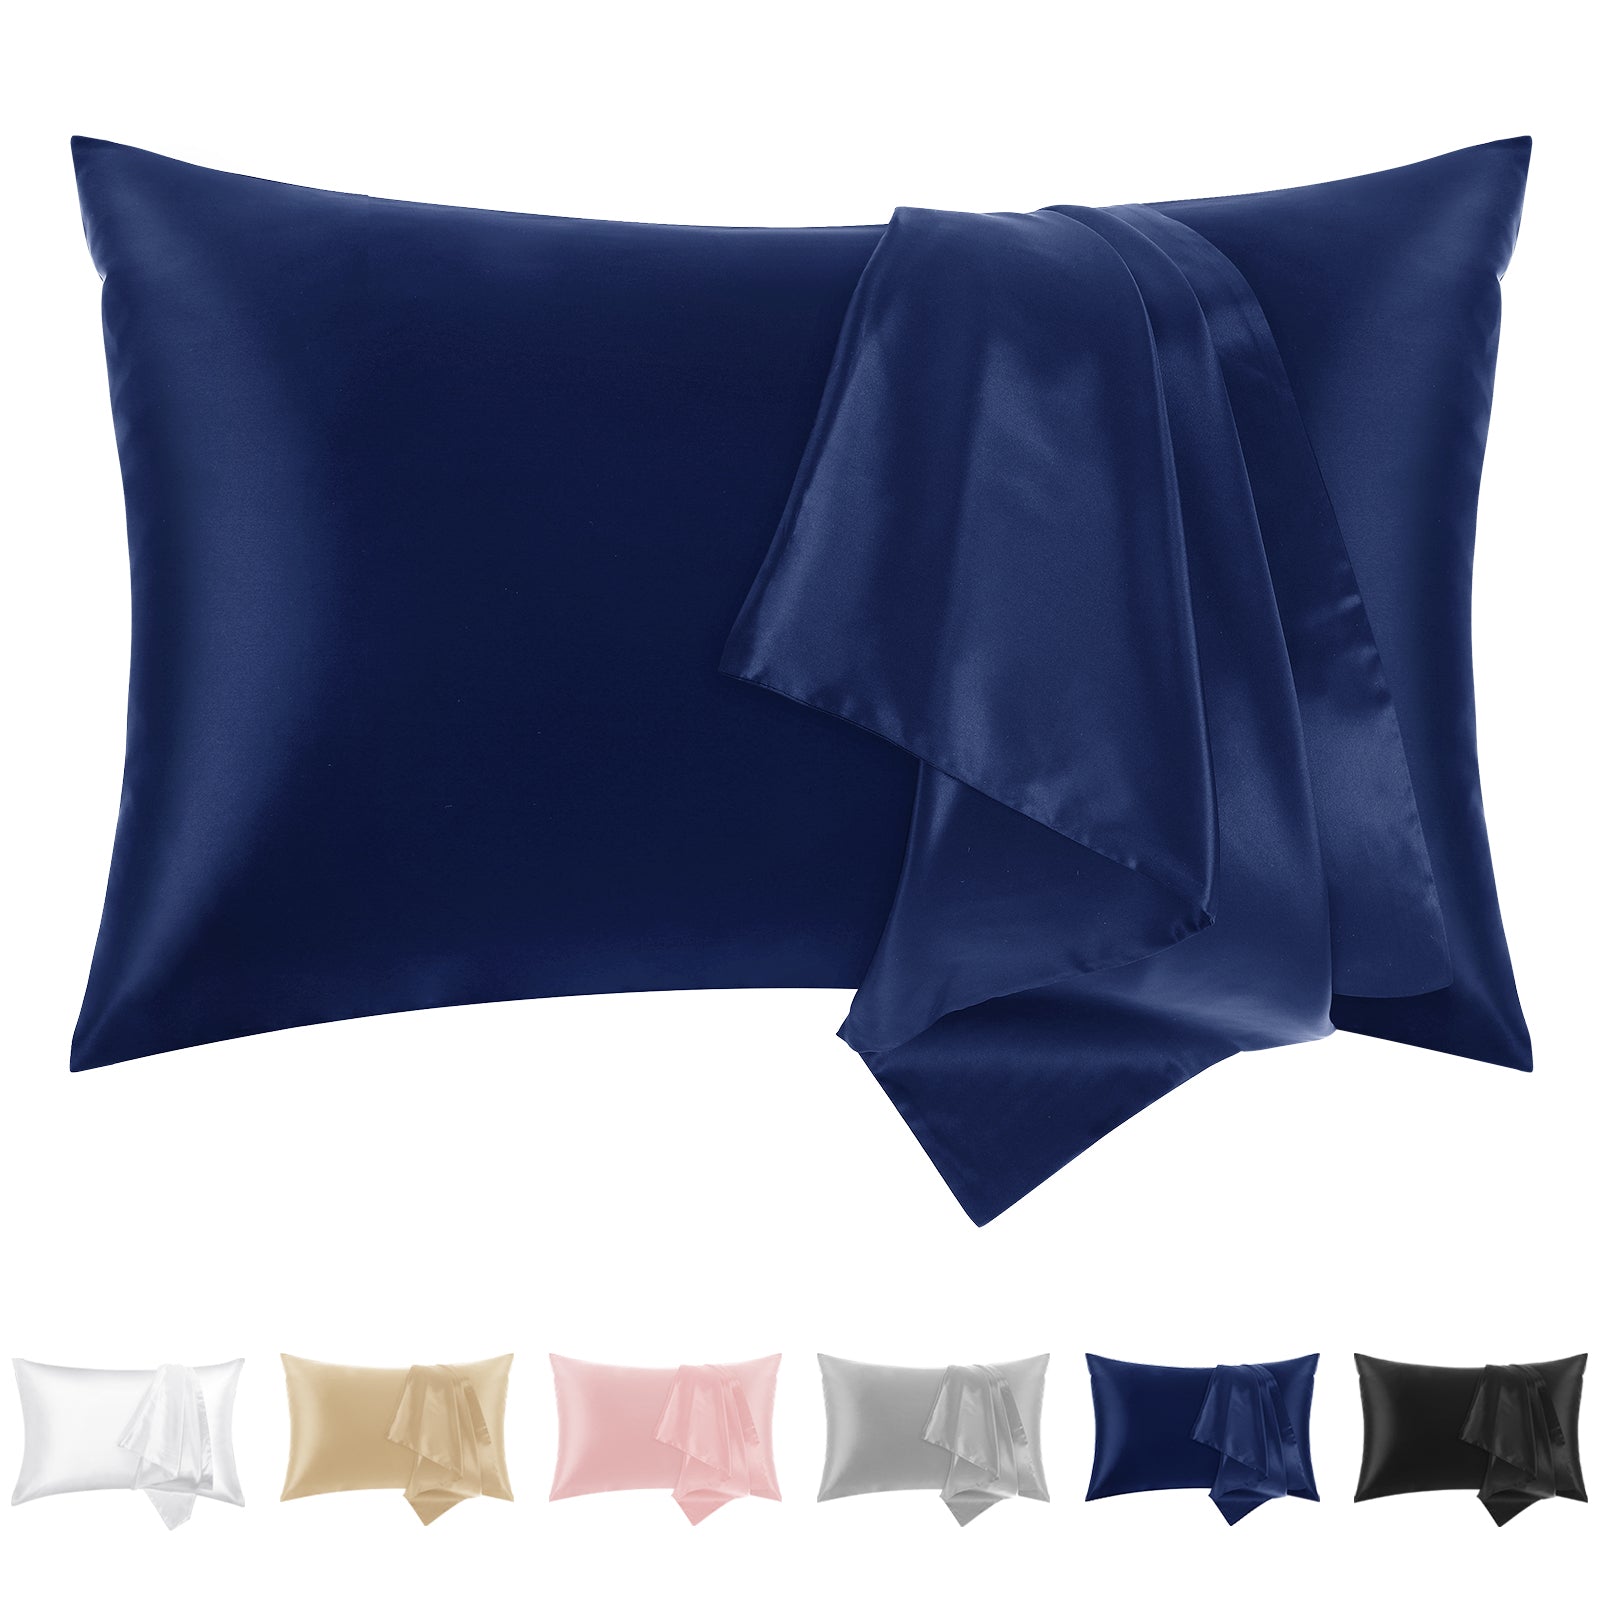 SOLEDI Natural Pure Mulberry Silk Cushion Cover (Navy blue)